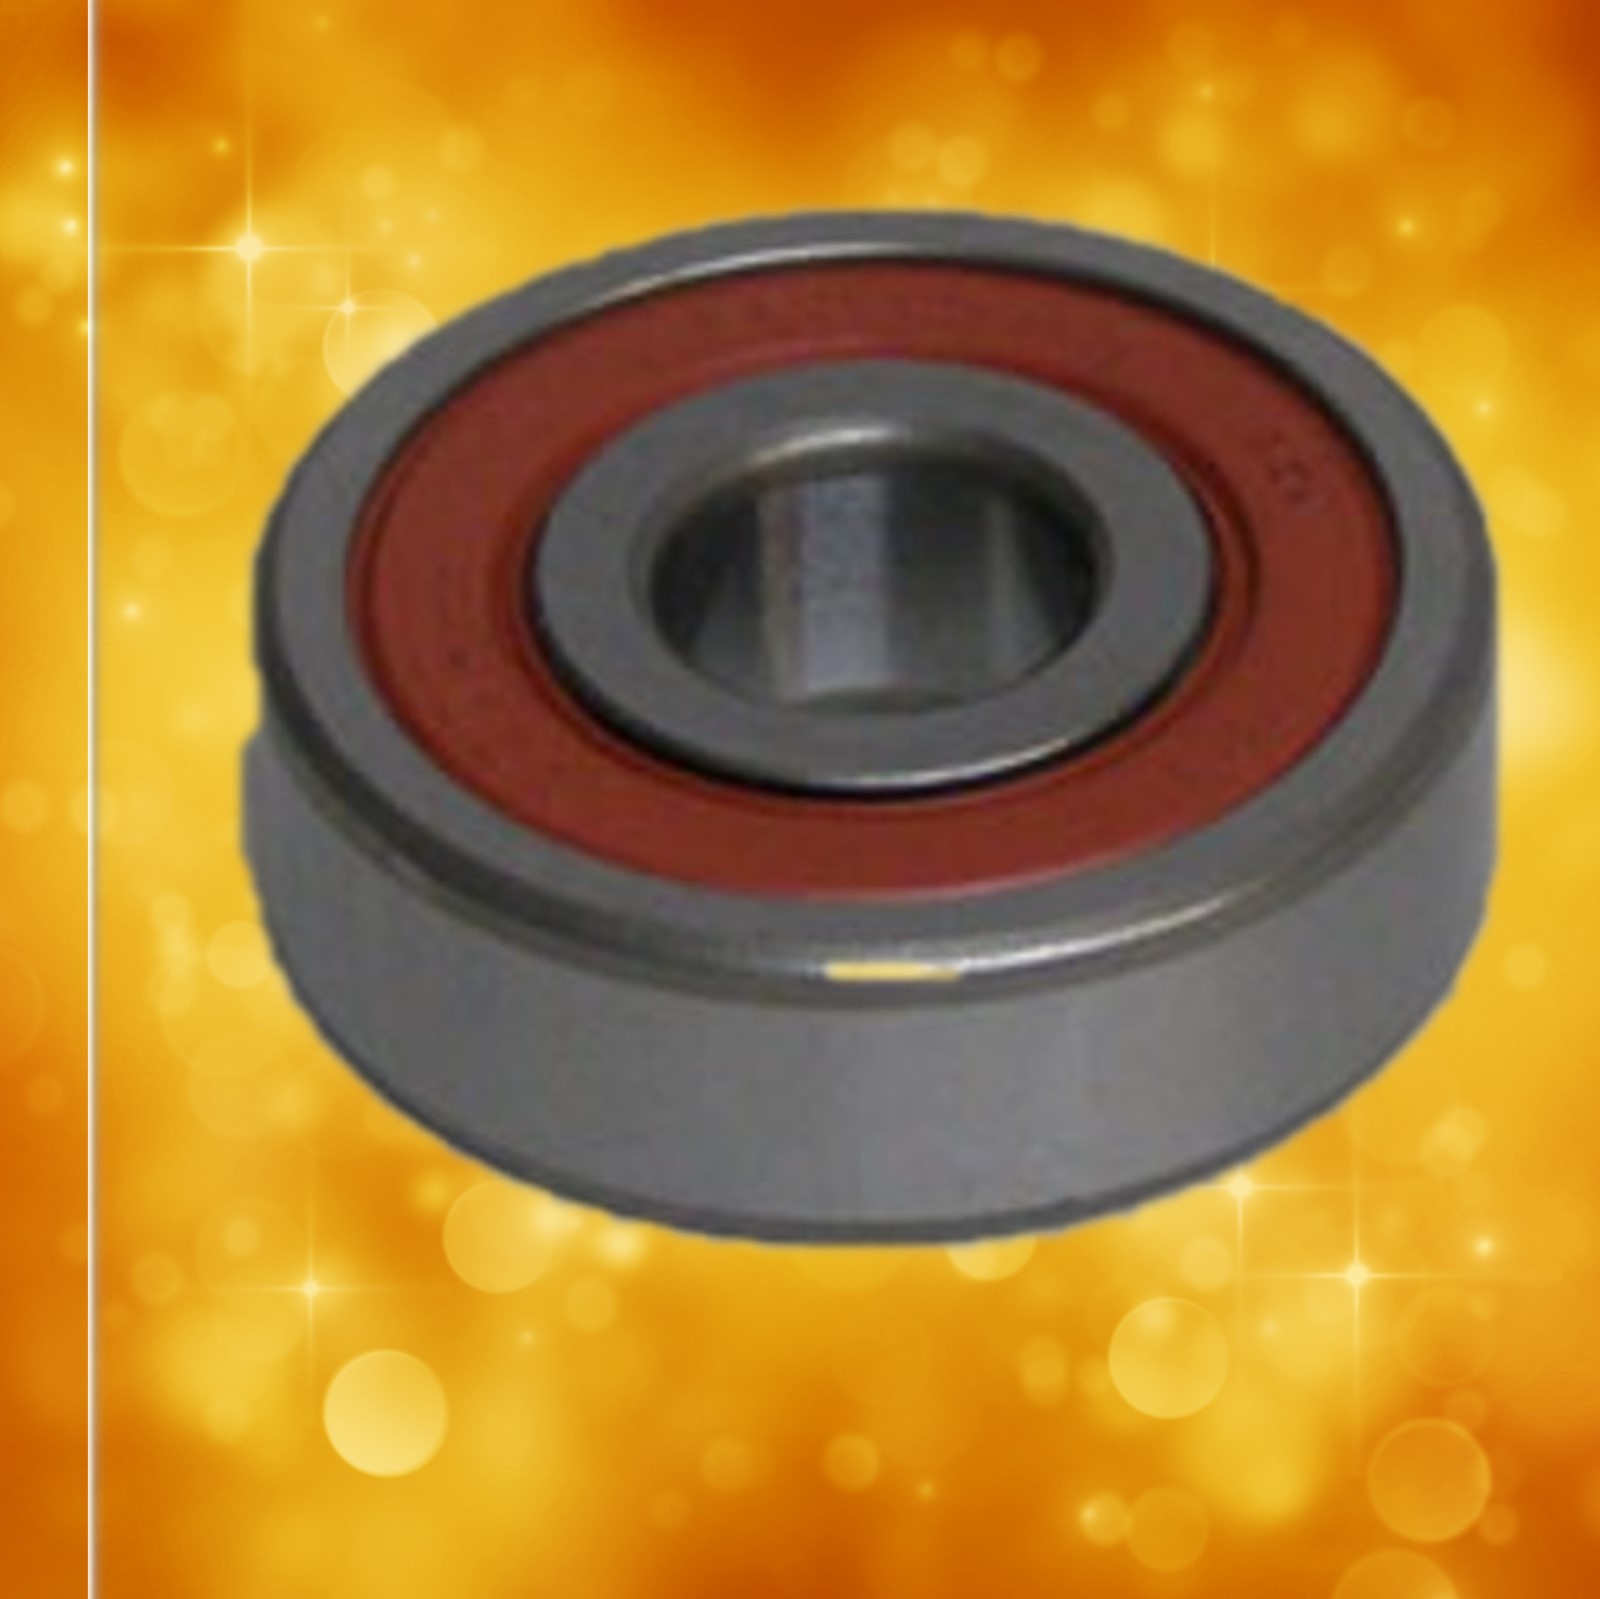 Delta Tool Part 894450 Bearing sub for 894463 894450